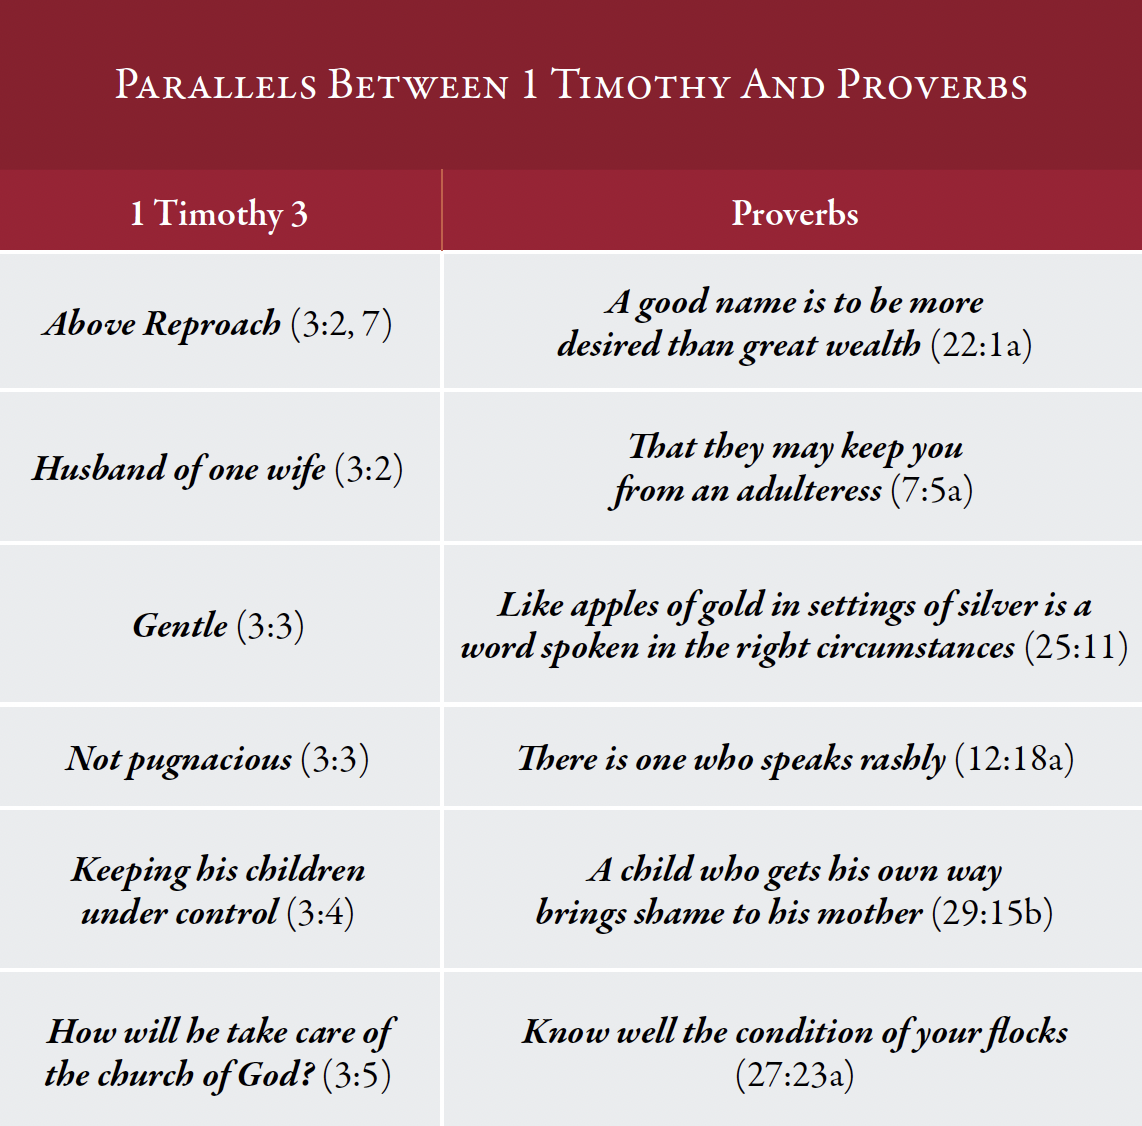 Parallels Between 1 Timothy And Proverbs